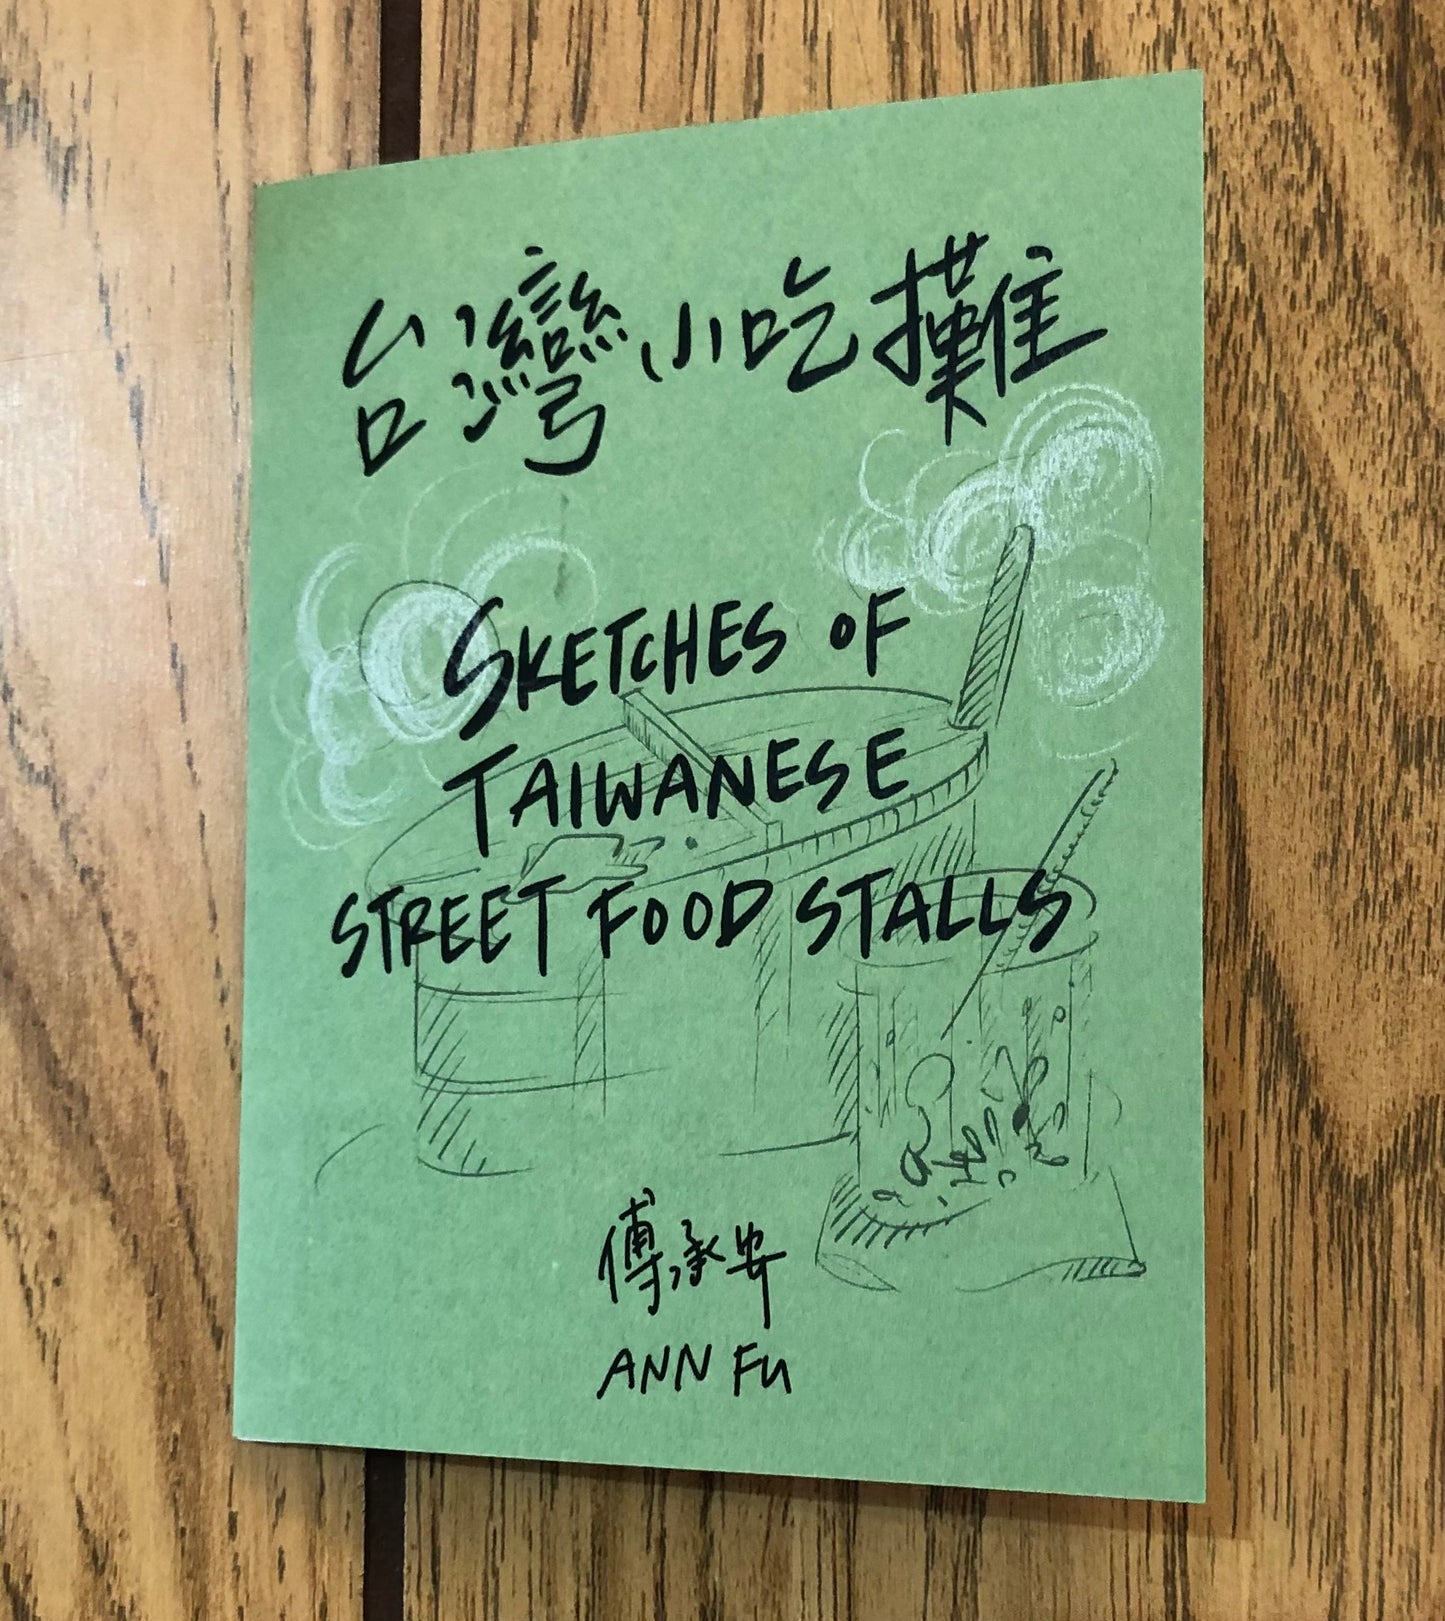 Sketches of Taiwanese Street Food Stalls